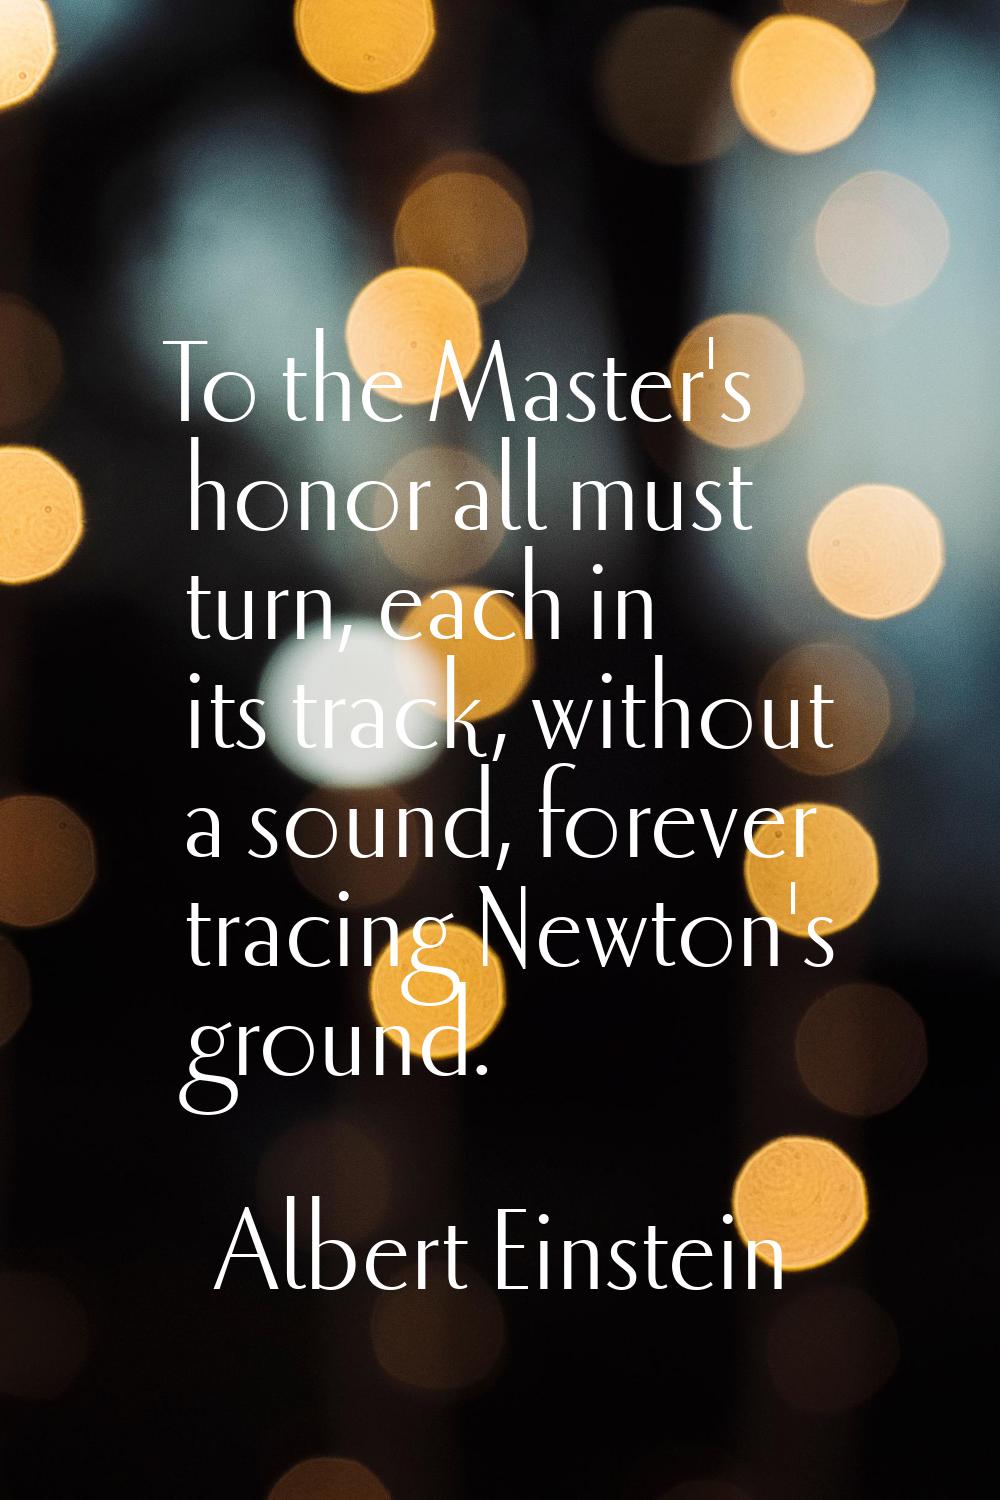 To the Master's honor all must turn, each in its track, without a sound, forever tracing Newton's g